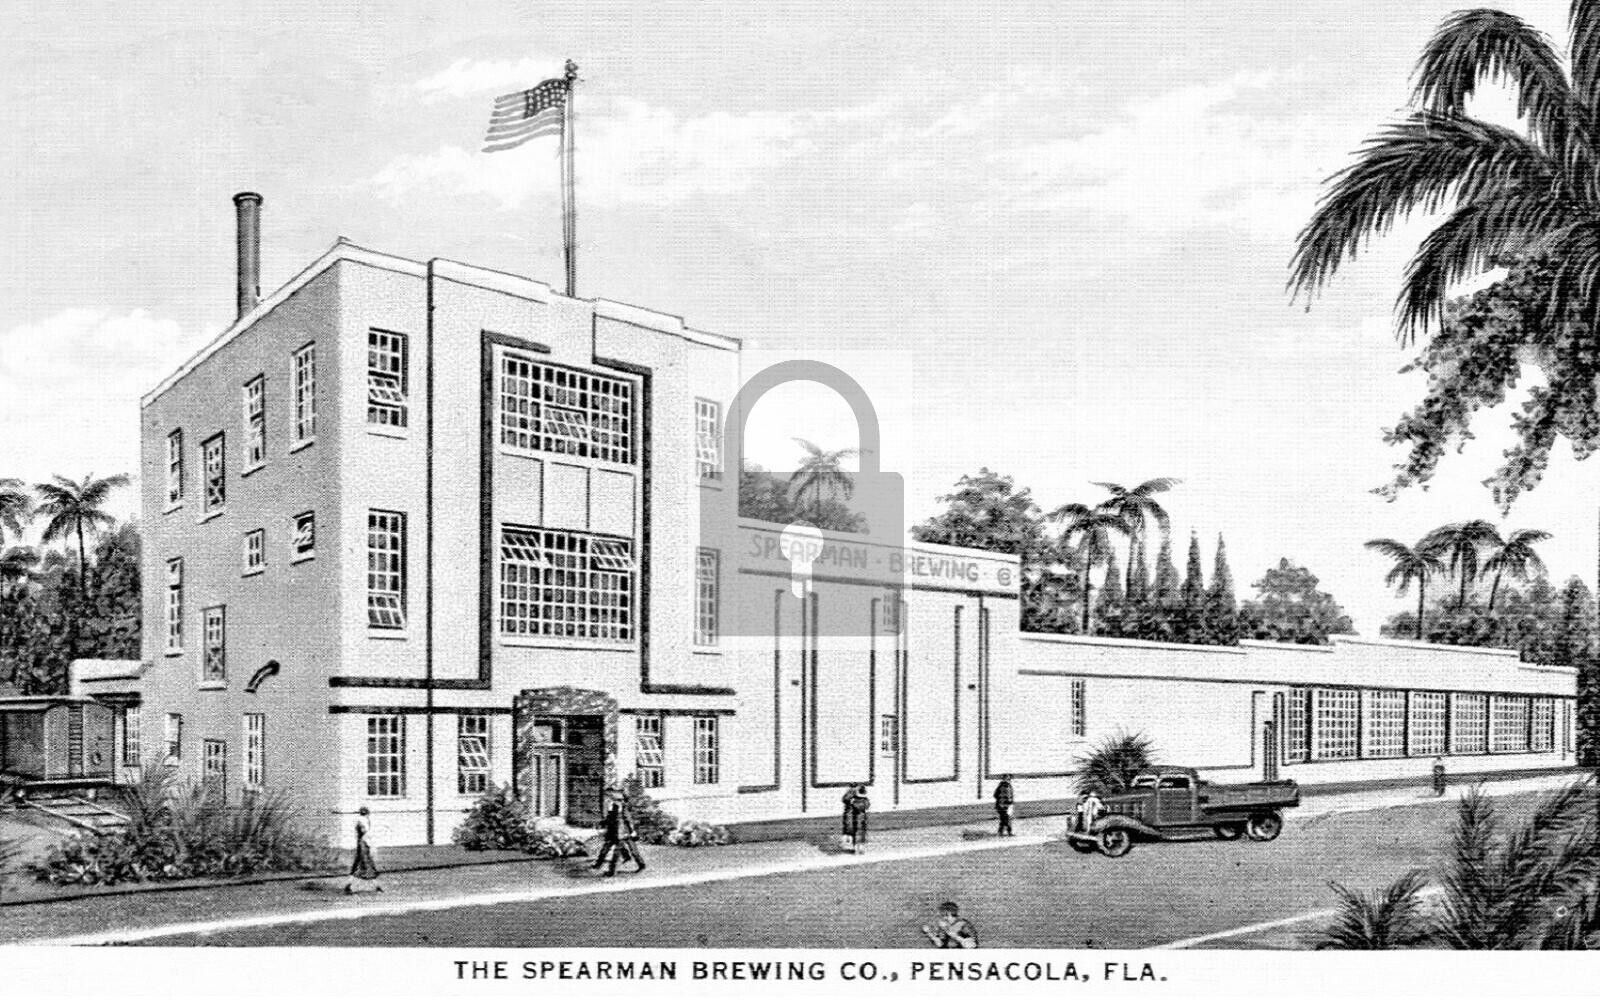 The Spearman Brewing Co Beer Brewery Pensacola Florida FL 8x10 Reprint